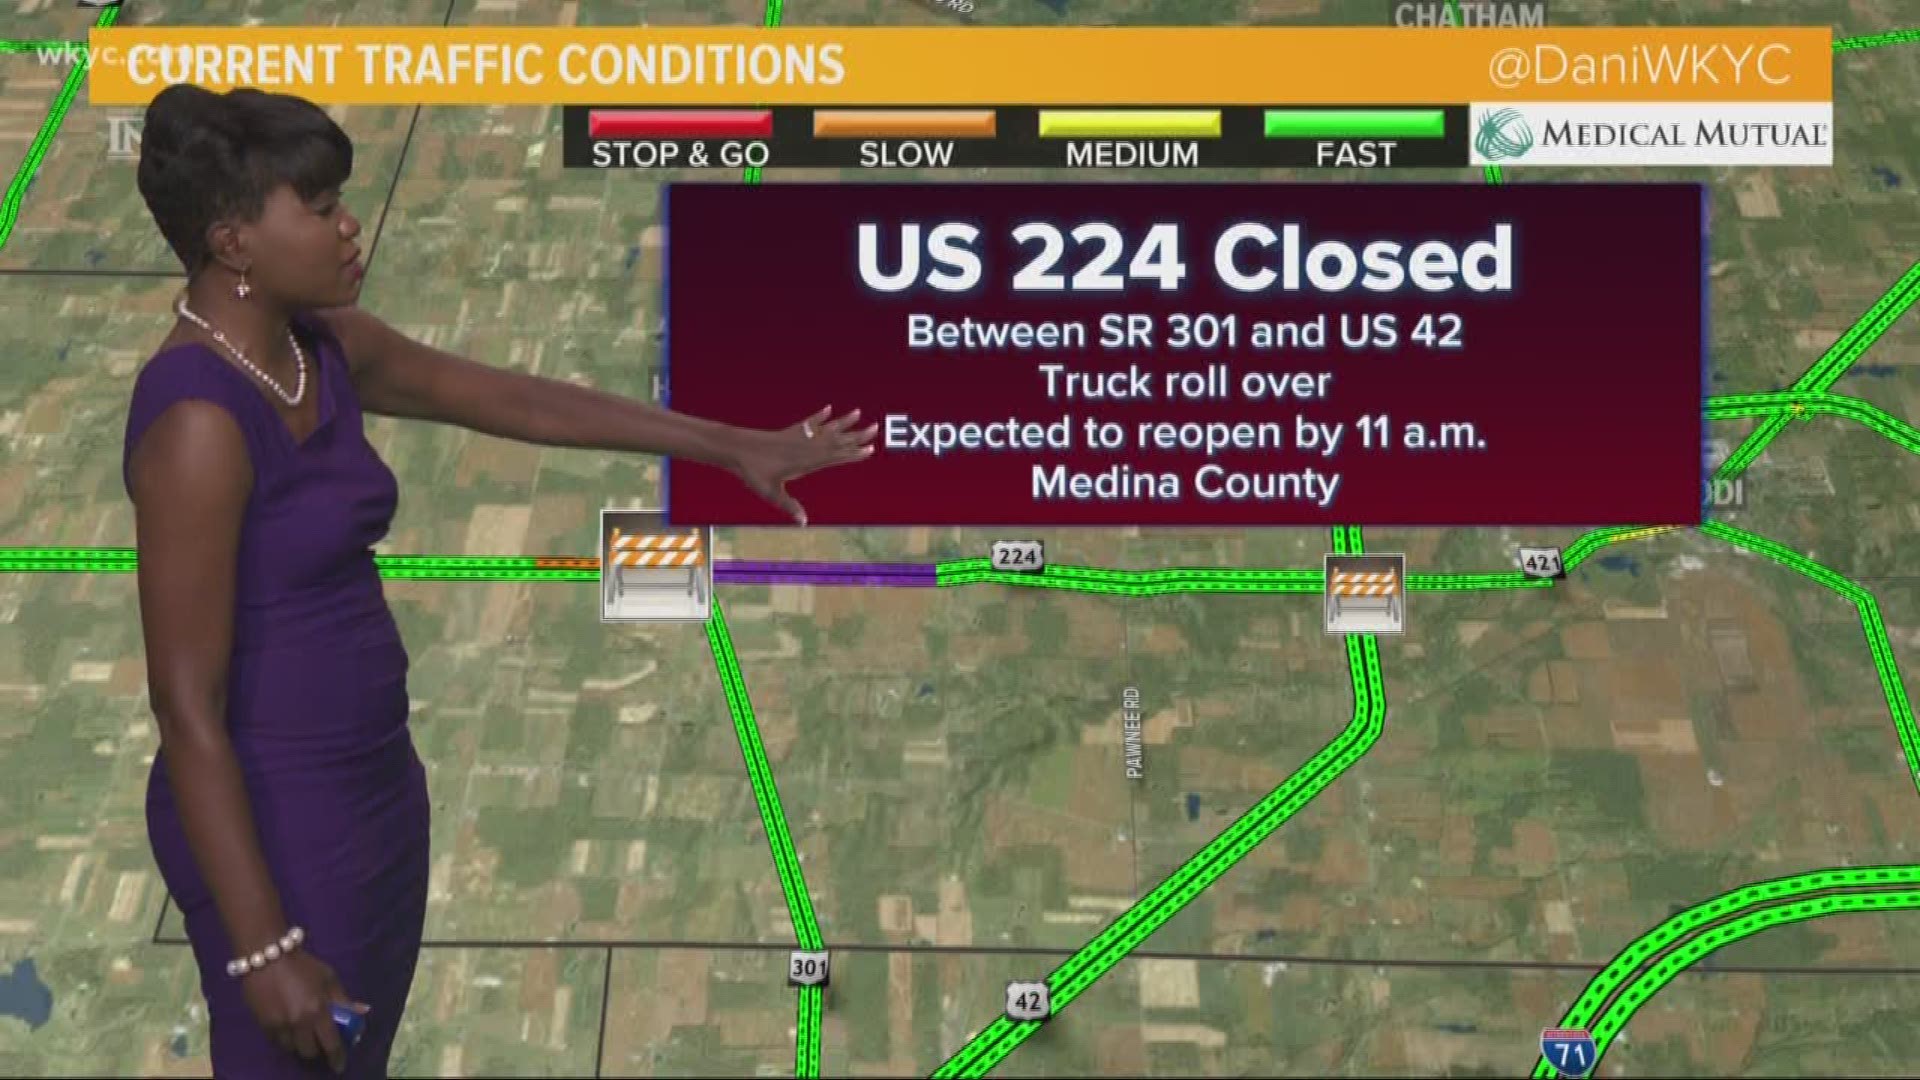 June 13, 2019: A portion of US 224 in Medina County is closed until further notice due to an overnight crash. The closure, which involves an overturned truck, impacts 224 between Route 301 and US 42.